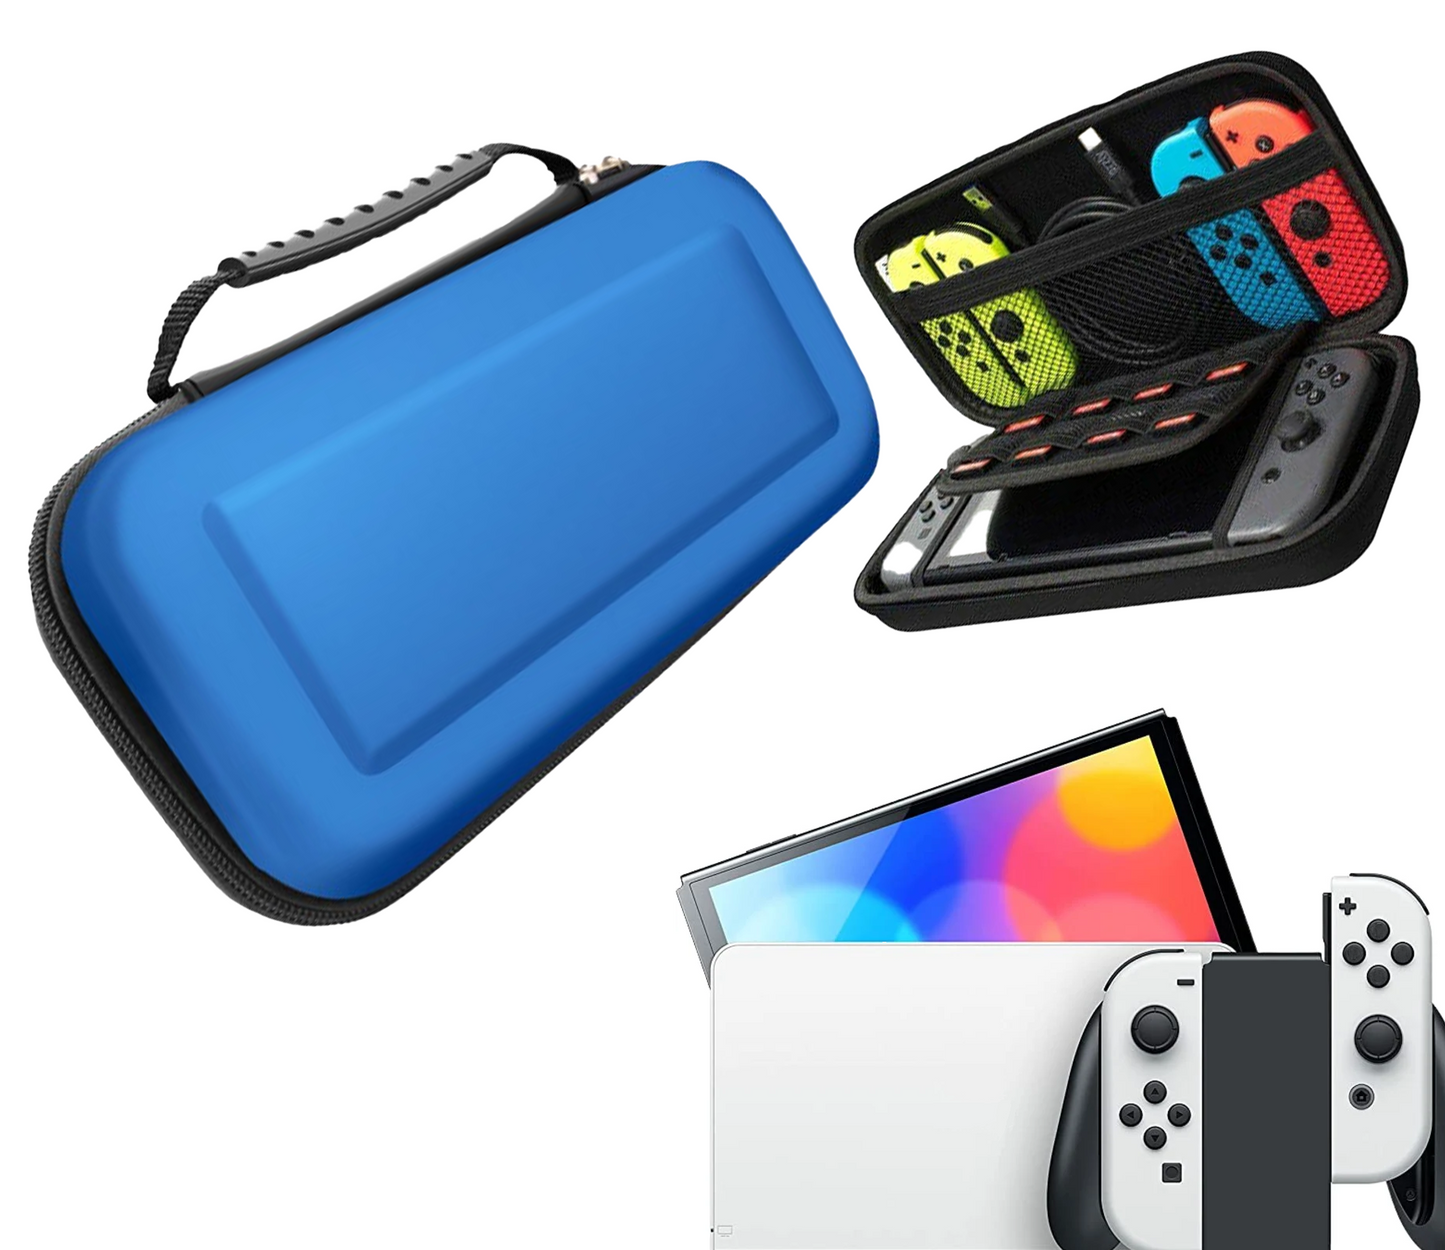 Protective cover | Hardcase Storage Cover | Case | Blue | Accessories suitable for Nintendo Switch